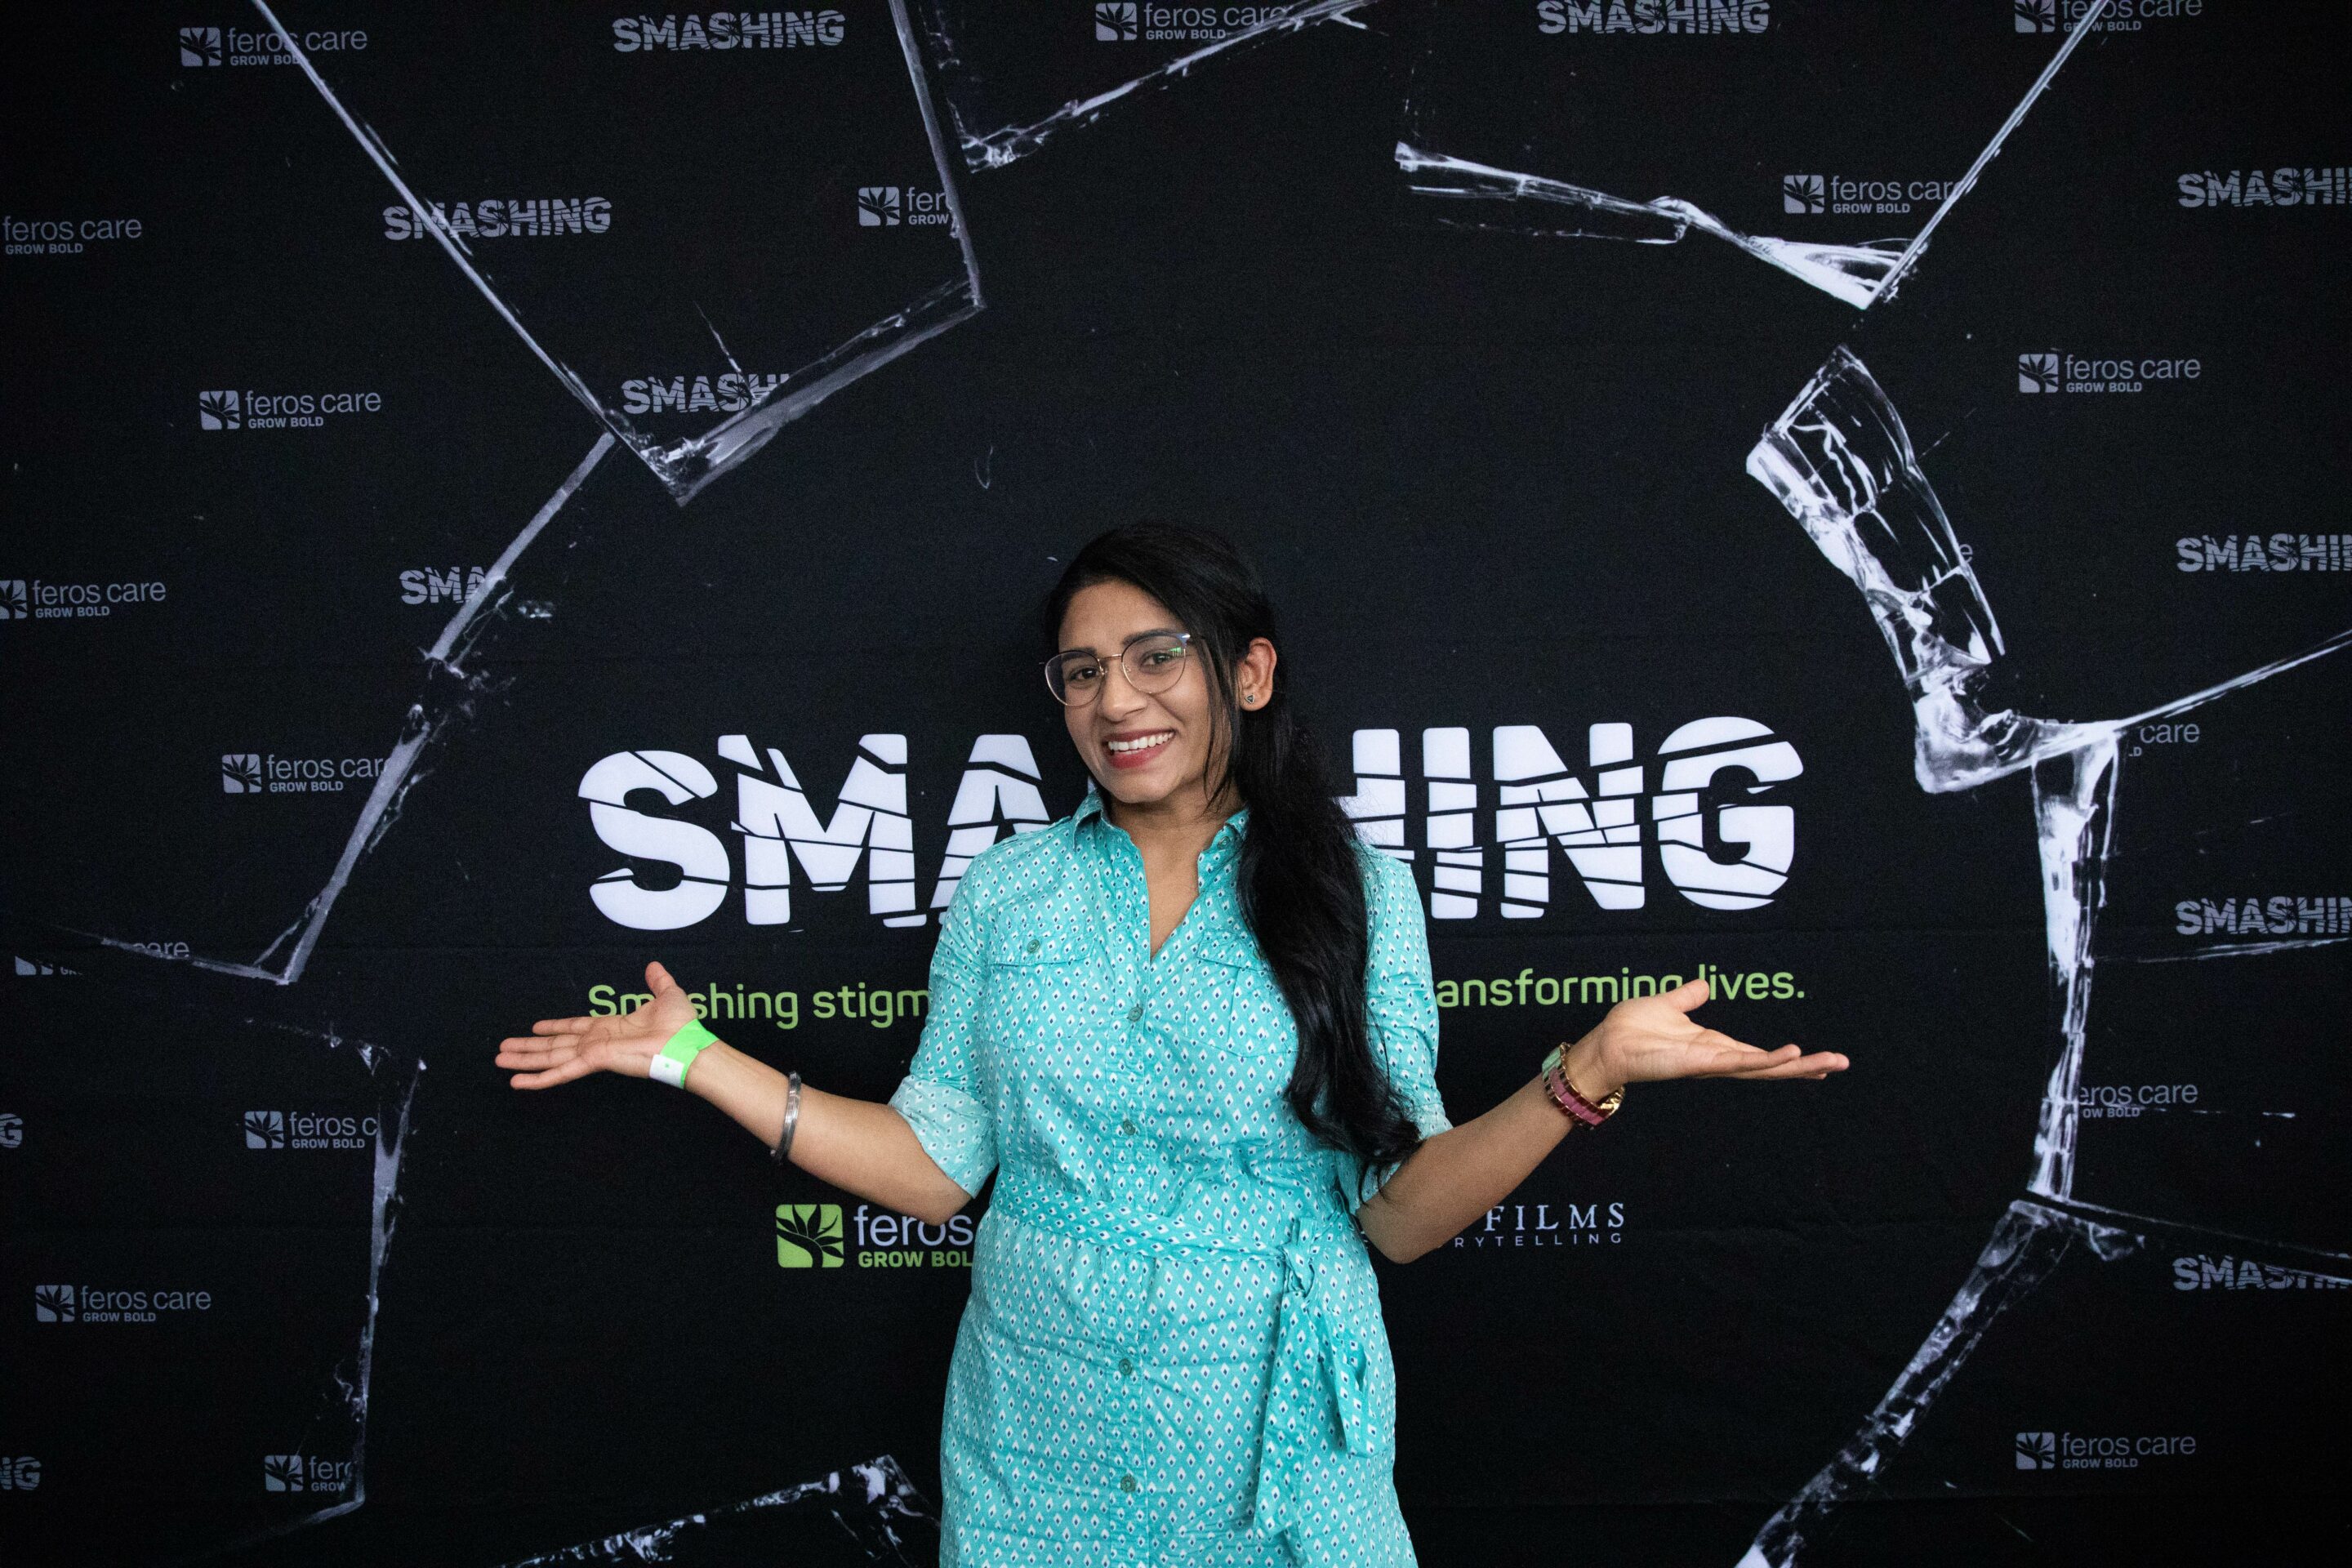 Prahb, Indian woman at premiere of SMASHING! documentary series about aged care. 